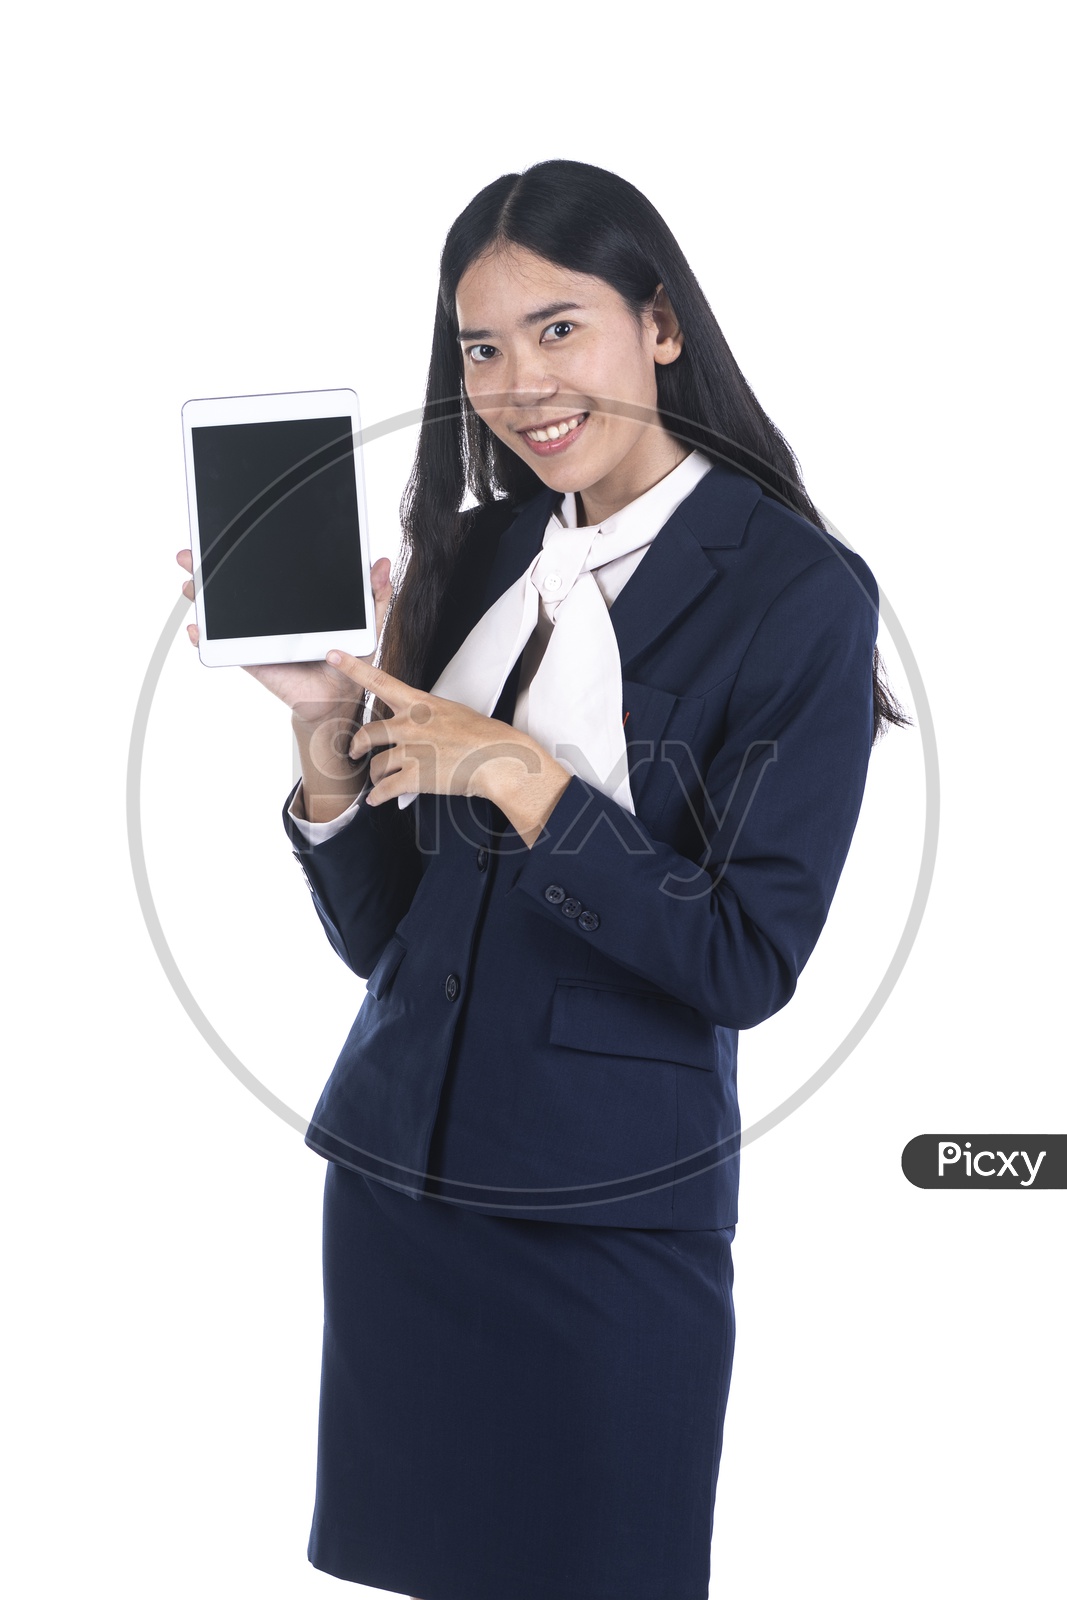 business woman in a suit using a digital tablet Gadget on isolated background